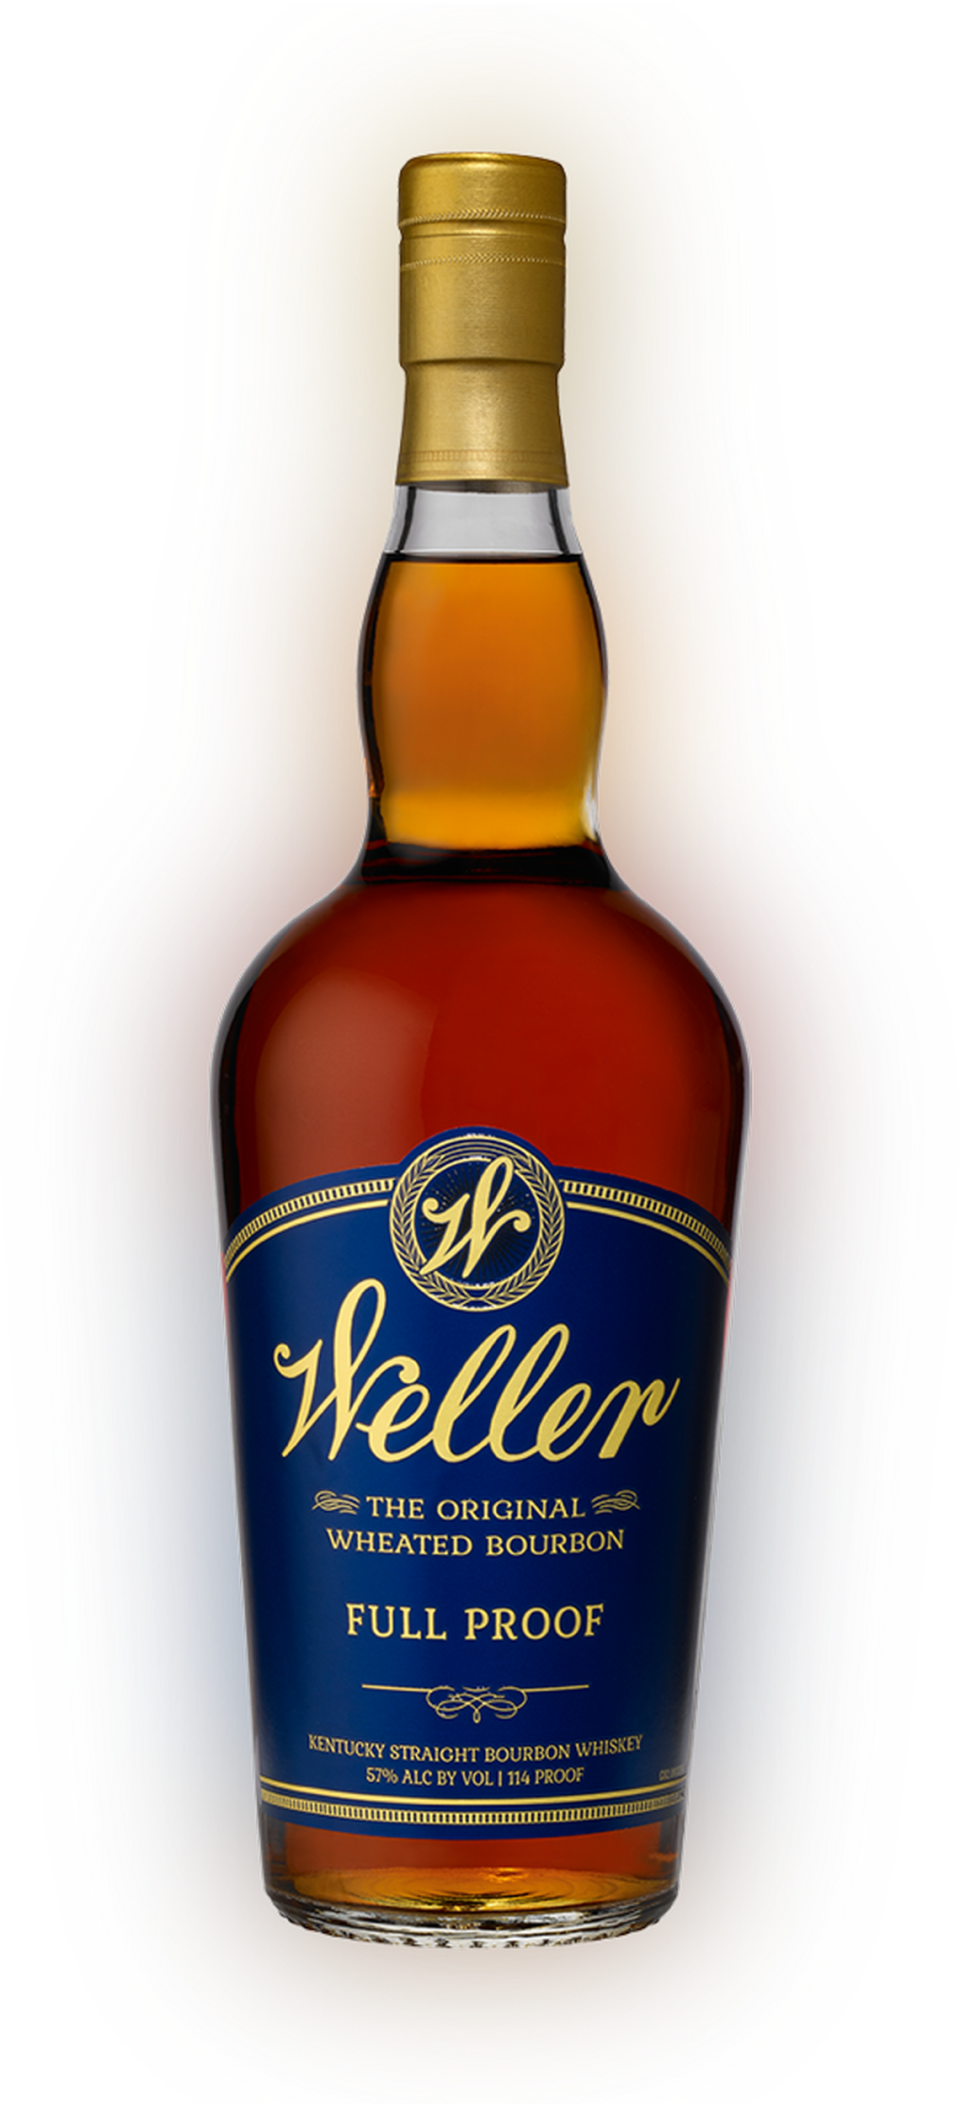 Buffalo Trace Distillery’s Weller Full Proof will also hit shelves in May, in limited quantities, with a suggested retail price of $49.99. It recently won Double Gold Medals at the San Francisco World Spirits Competition.